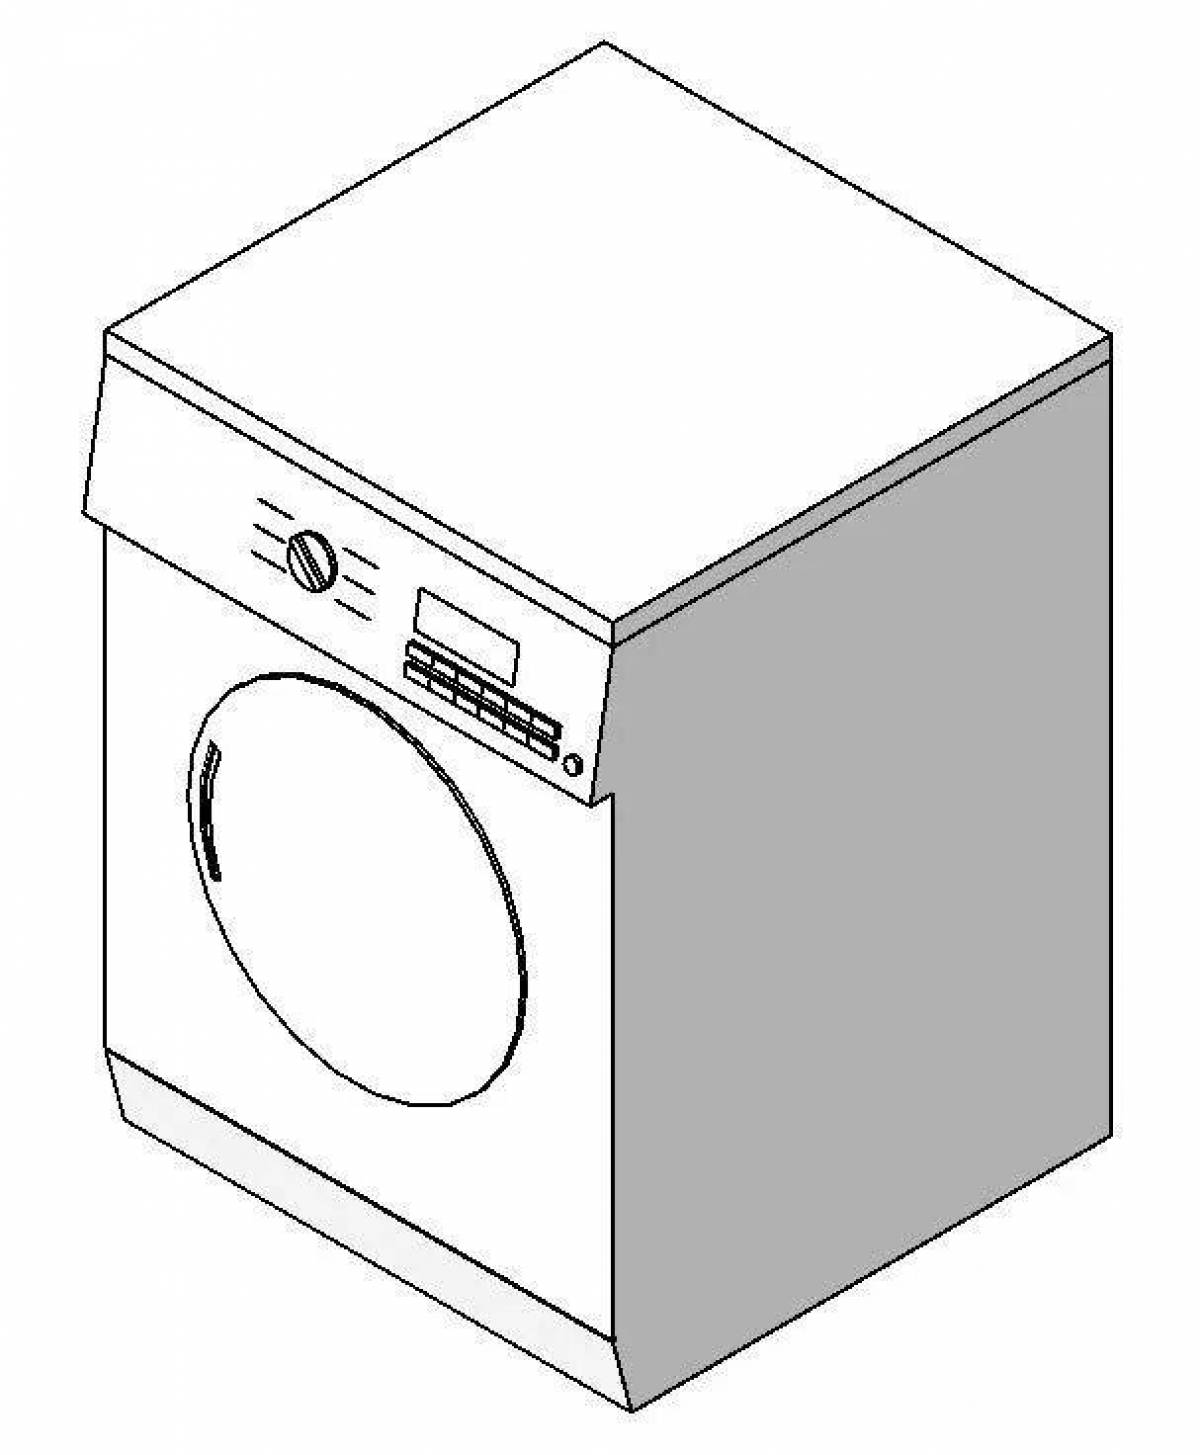 Exquisite washing machine coloring book